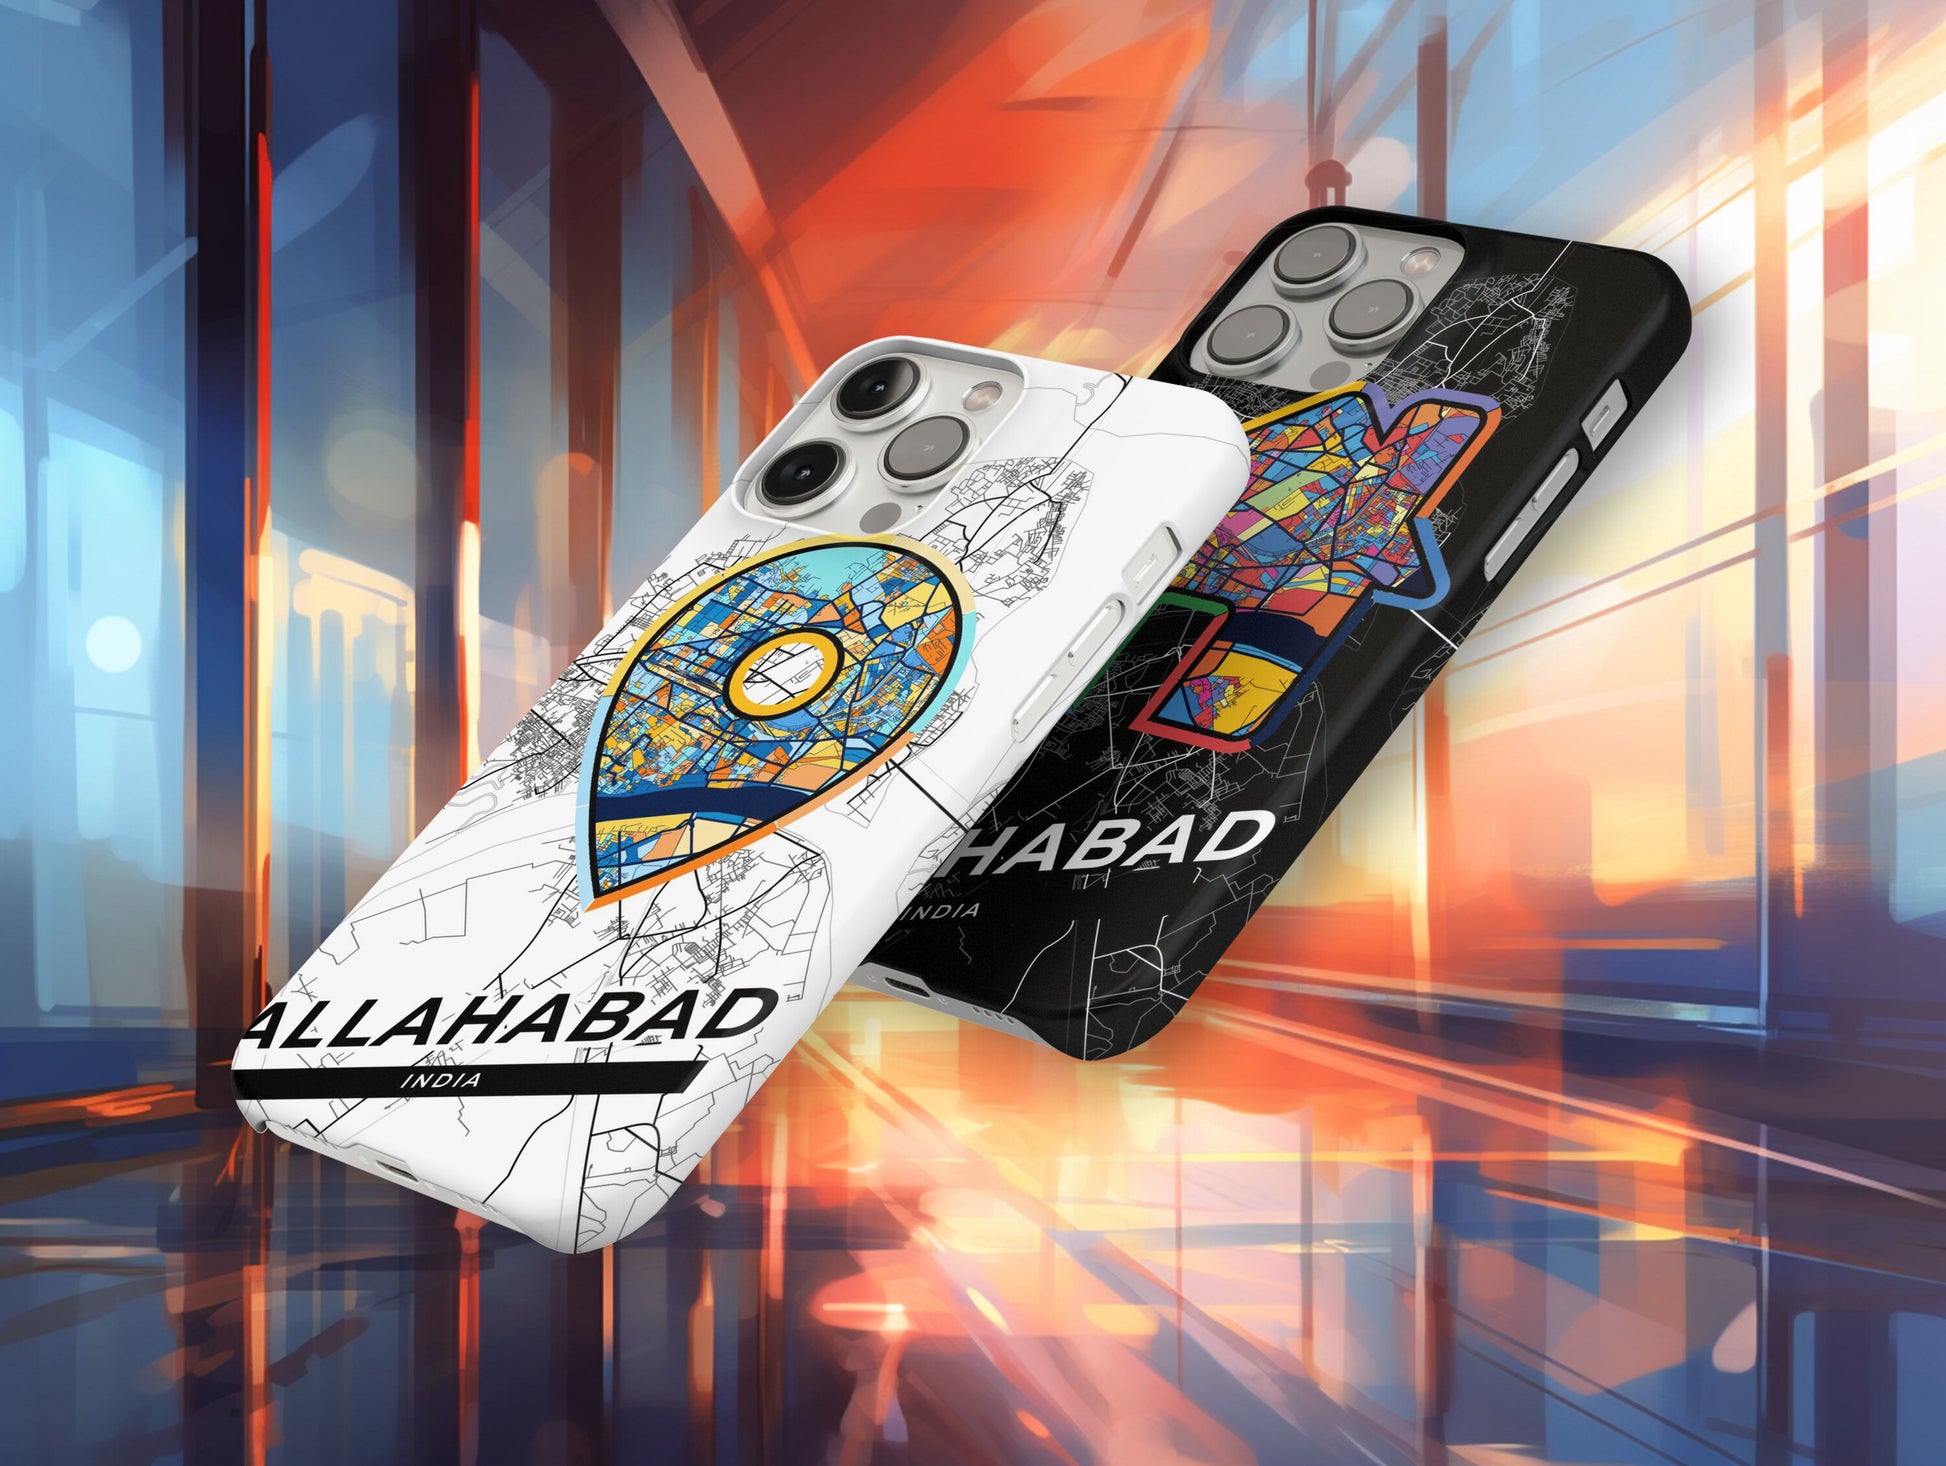 Allahabad India slim phone case with colorful icon. Birthday, wedding or housewarming gift. Couple match cases.